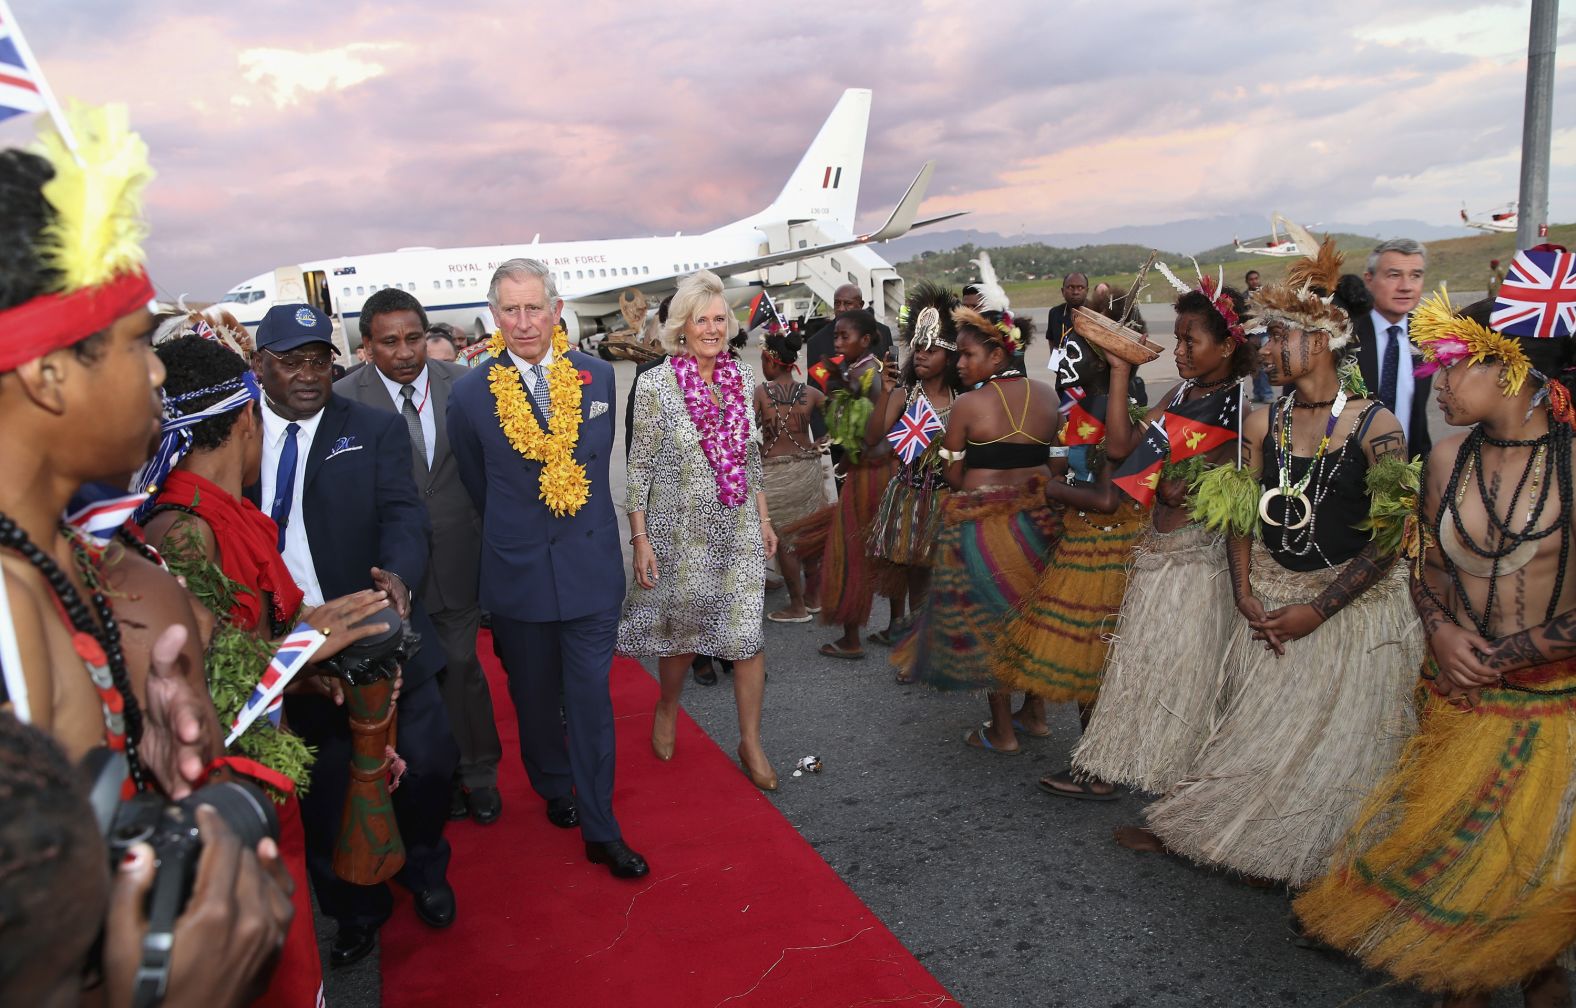 Charles and Camilla arrive in Port Moresby, Papua New Guinea, as part of a Diamond Jubilee tour in November 2012.